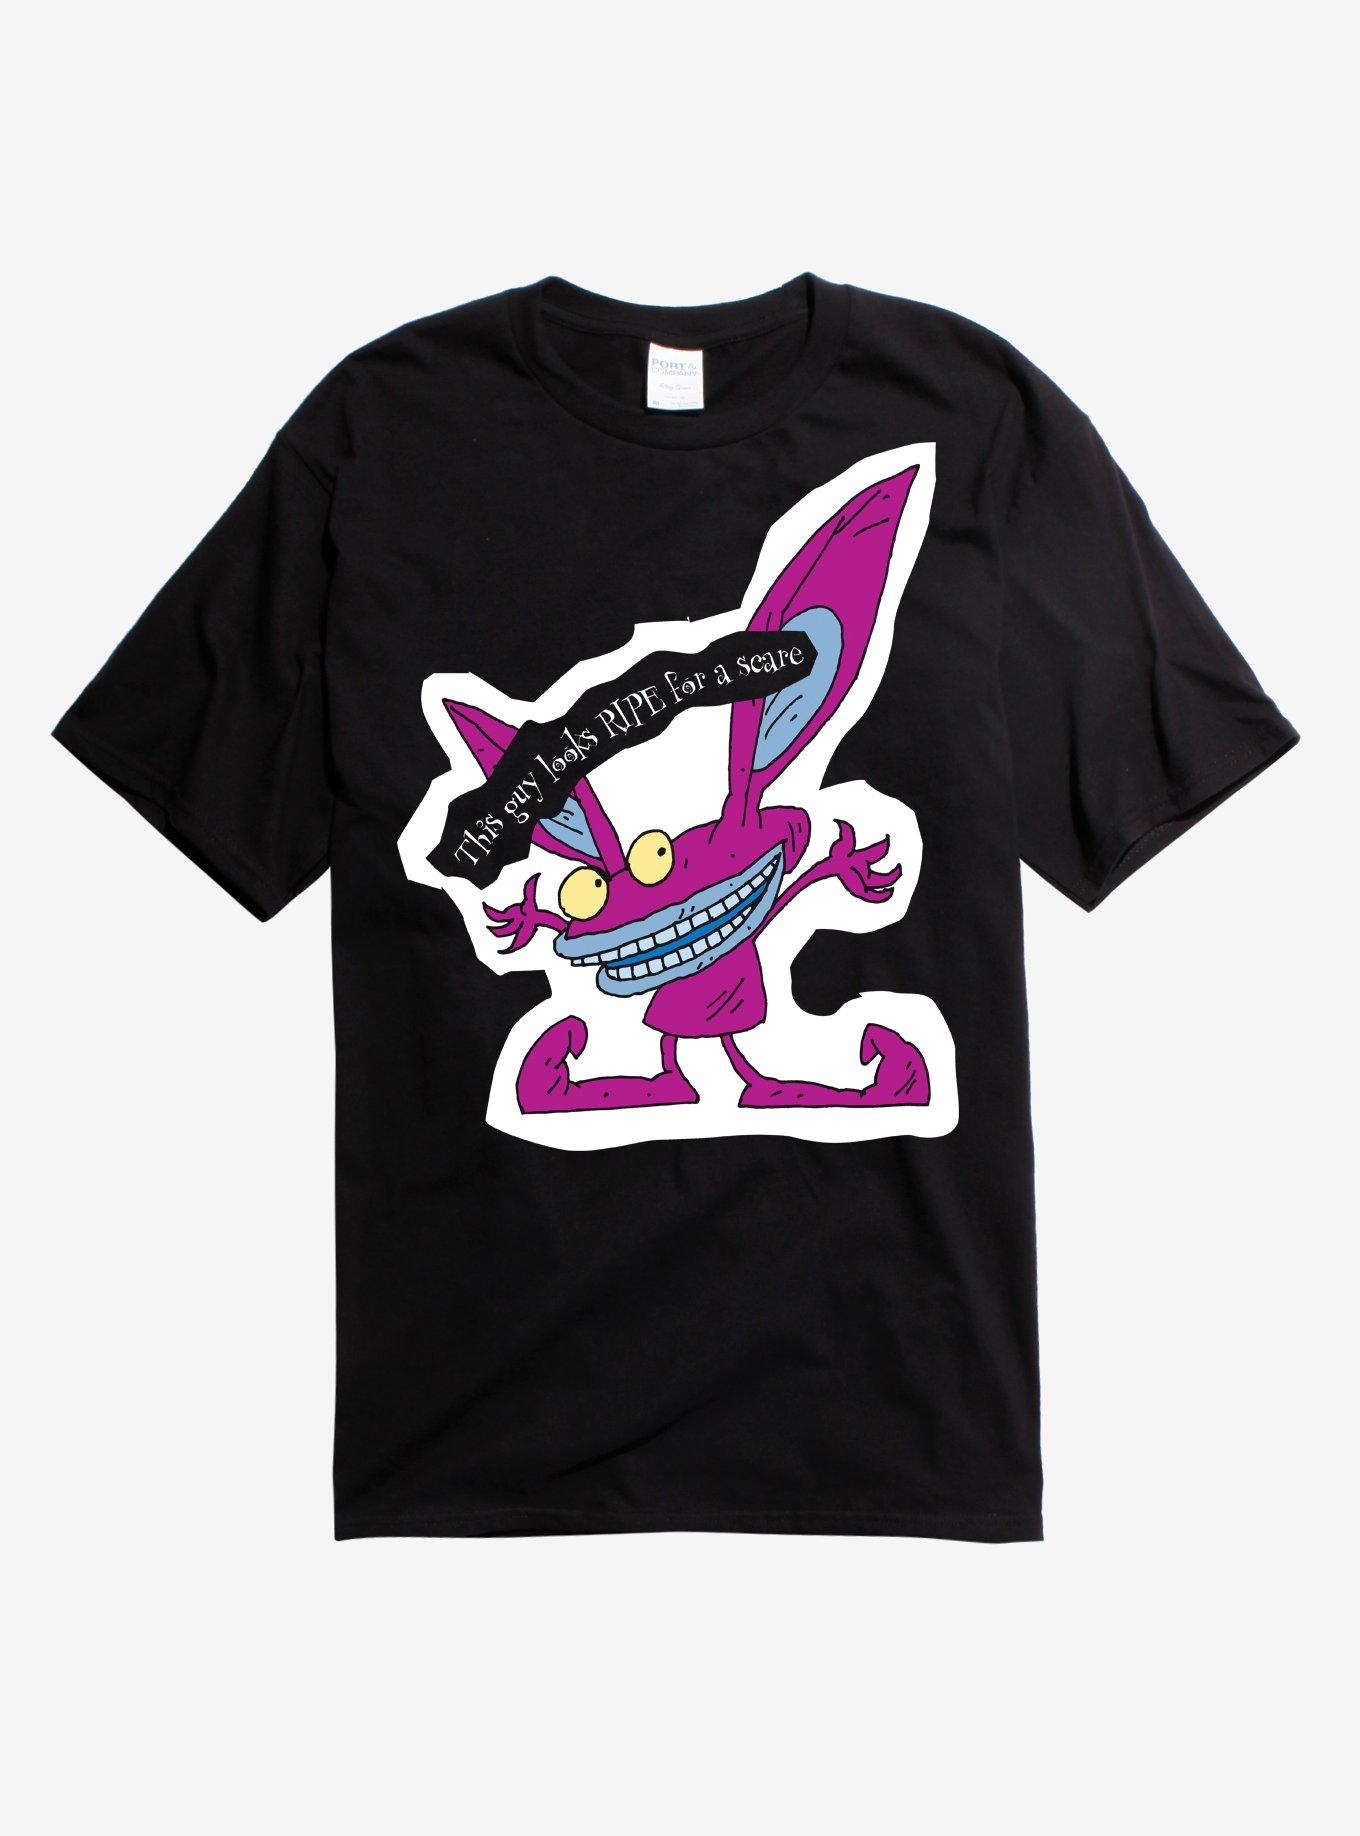 Aaahh!!! Real Monsters Ickis T-Shirt, BLACK, hi-res